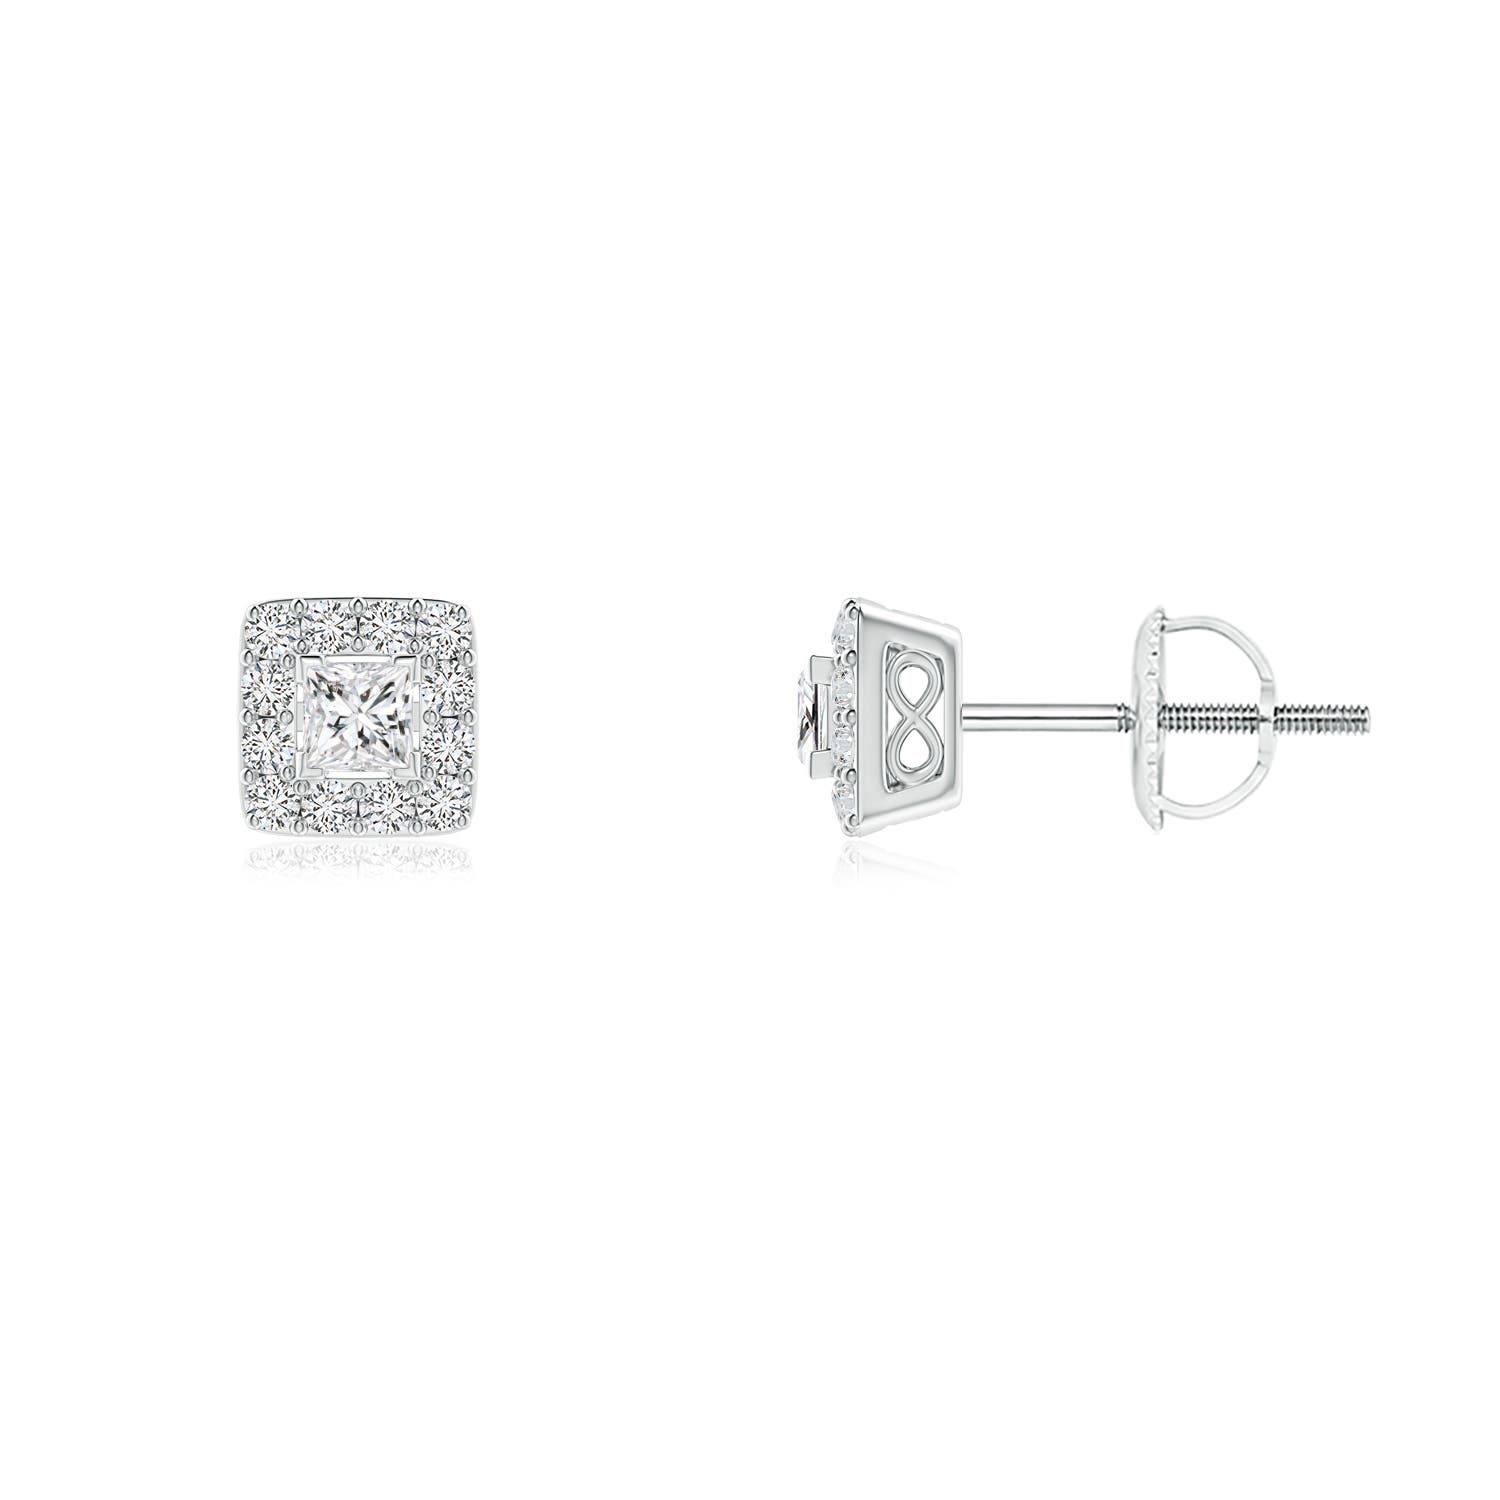 H, SI2 / 0.51 CT / 14 KT White Gold